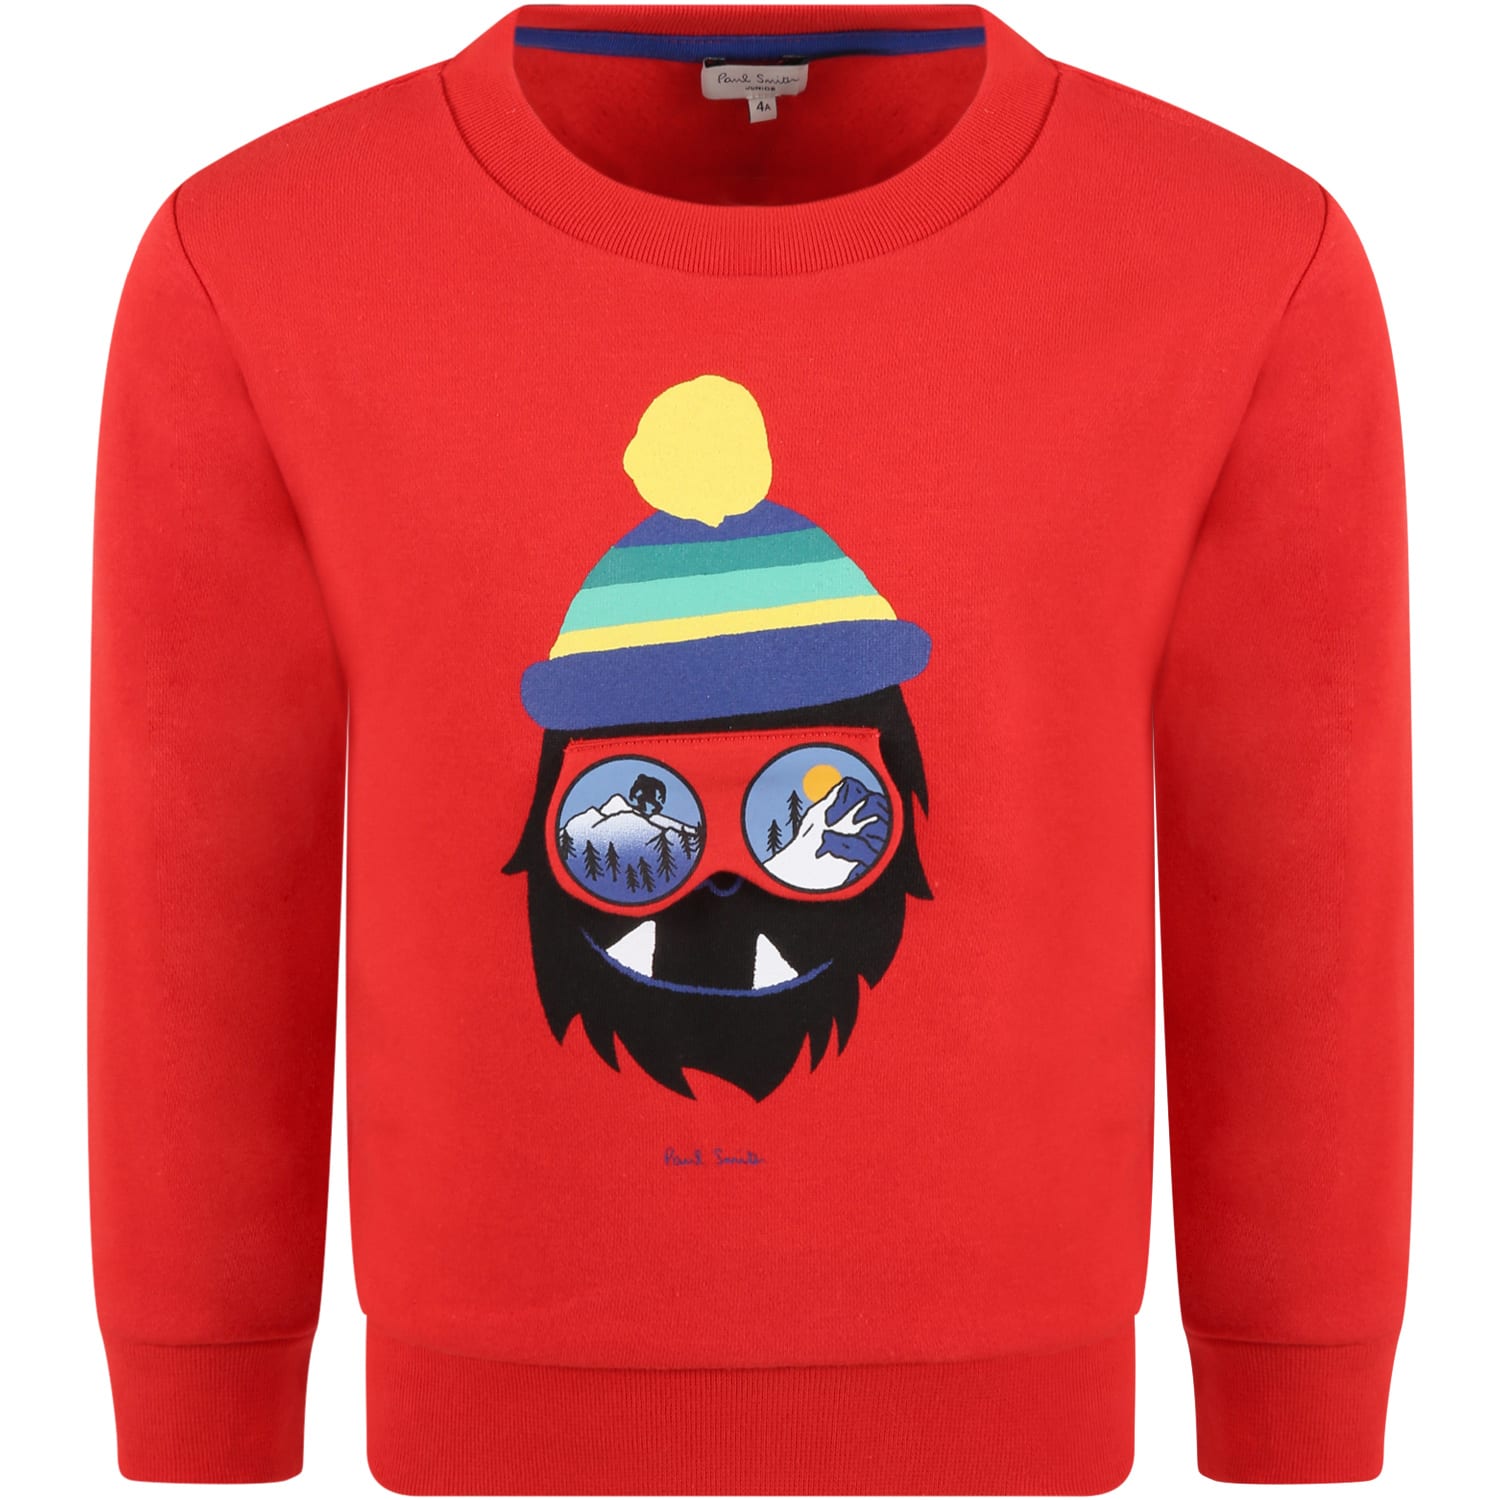 Paul Smith Junior Red Sweatshirt For Boy With Monster